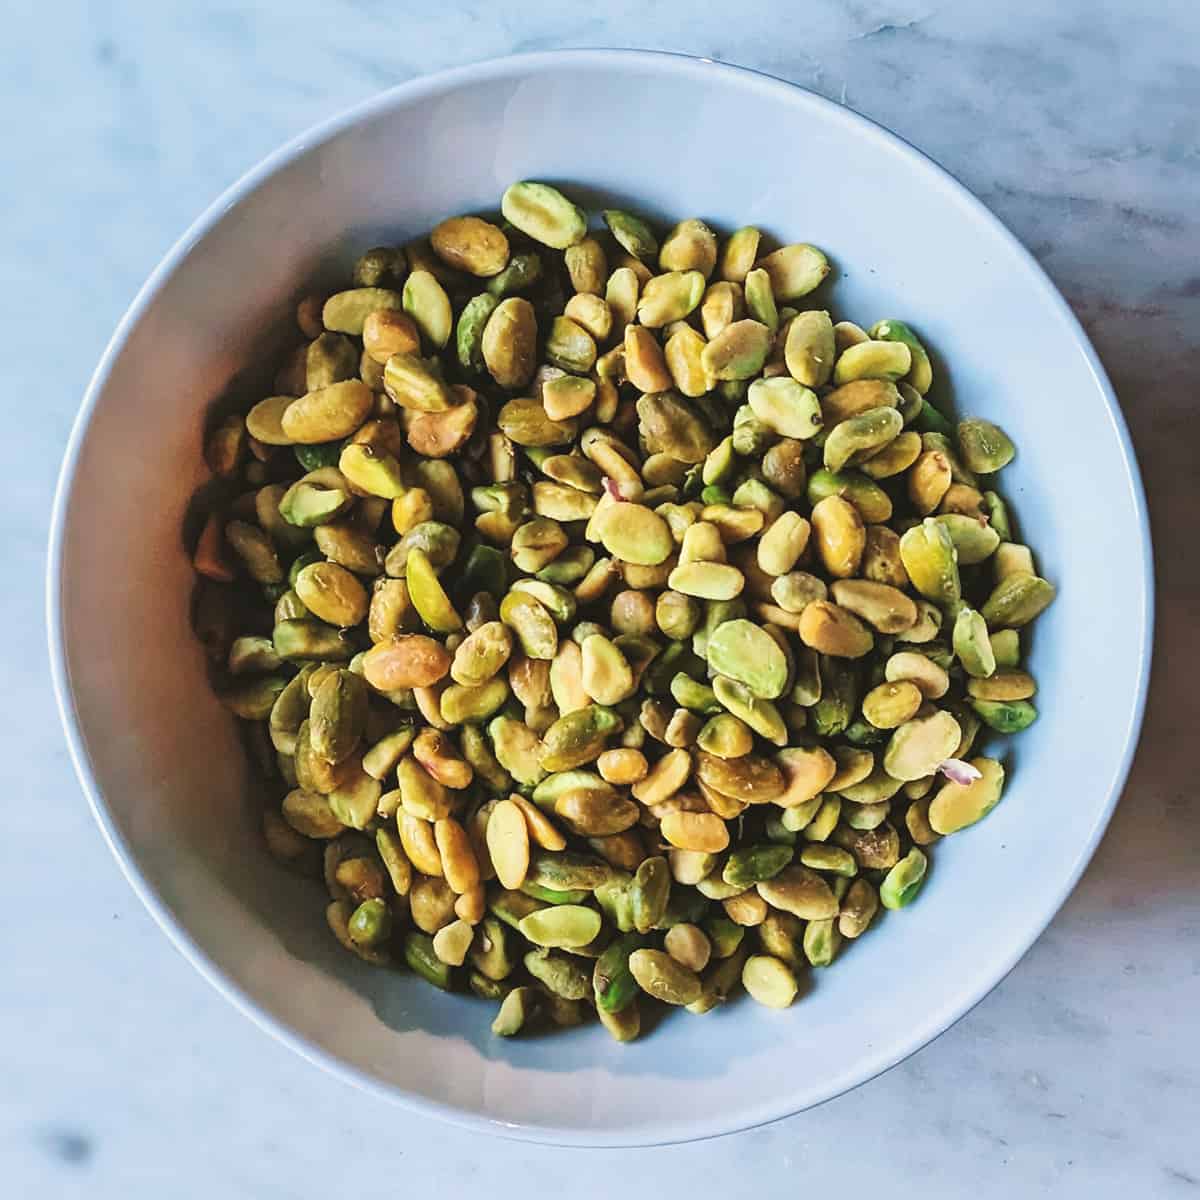 Pistachio Panna Cotta - pistachios peeled and resting in a white bowl